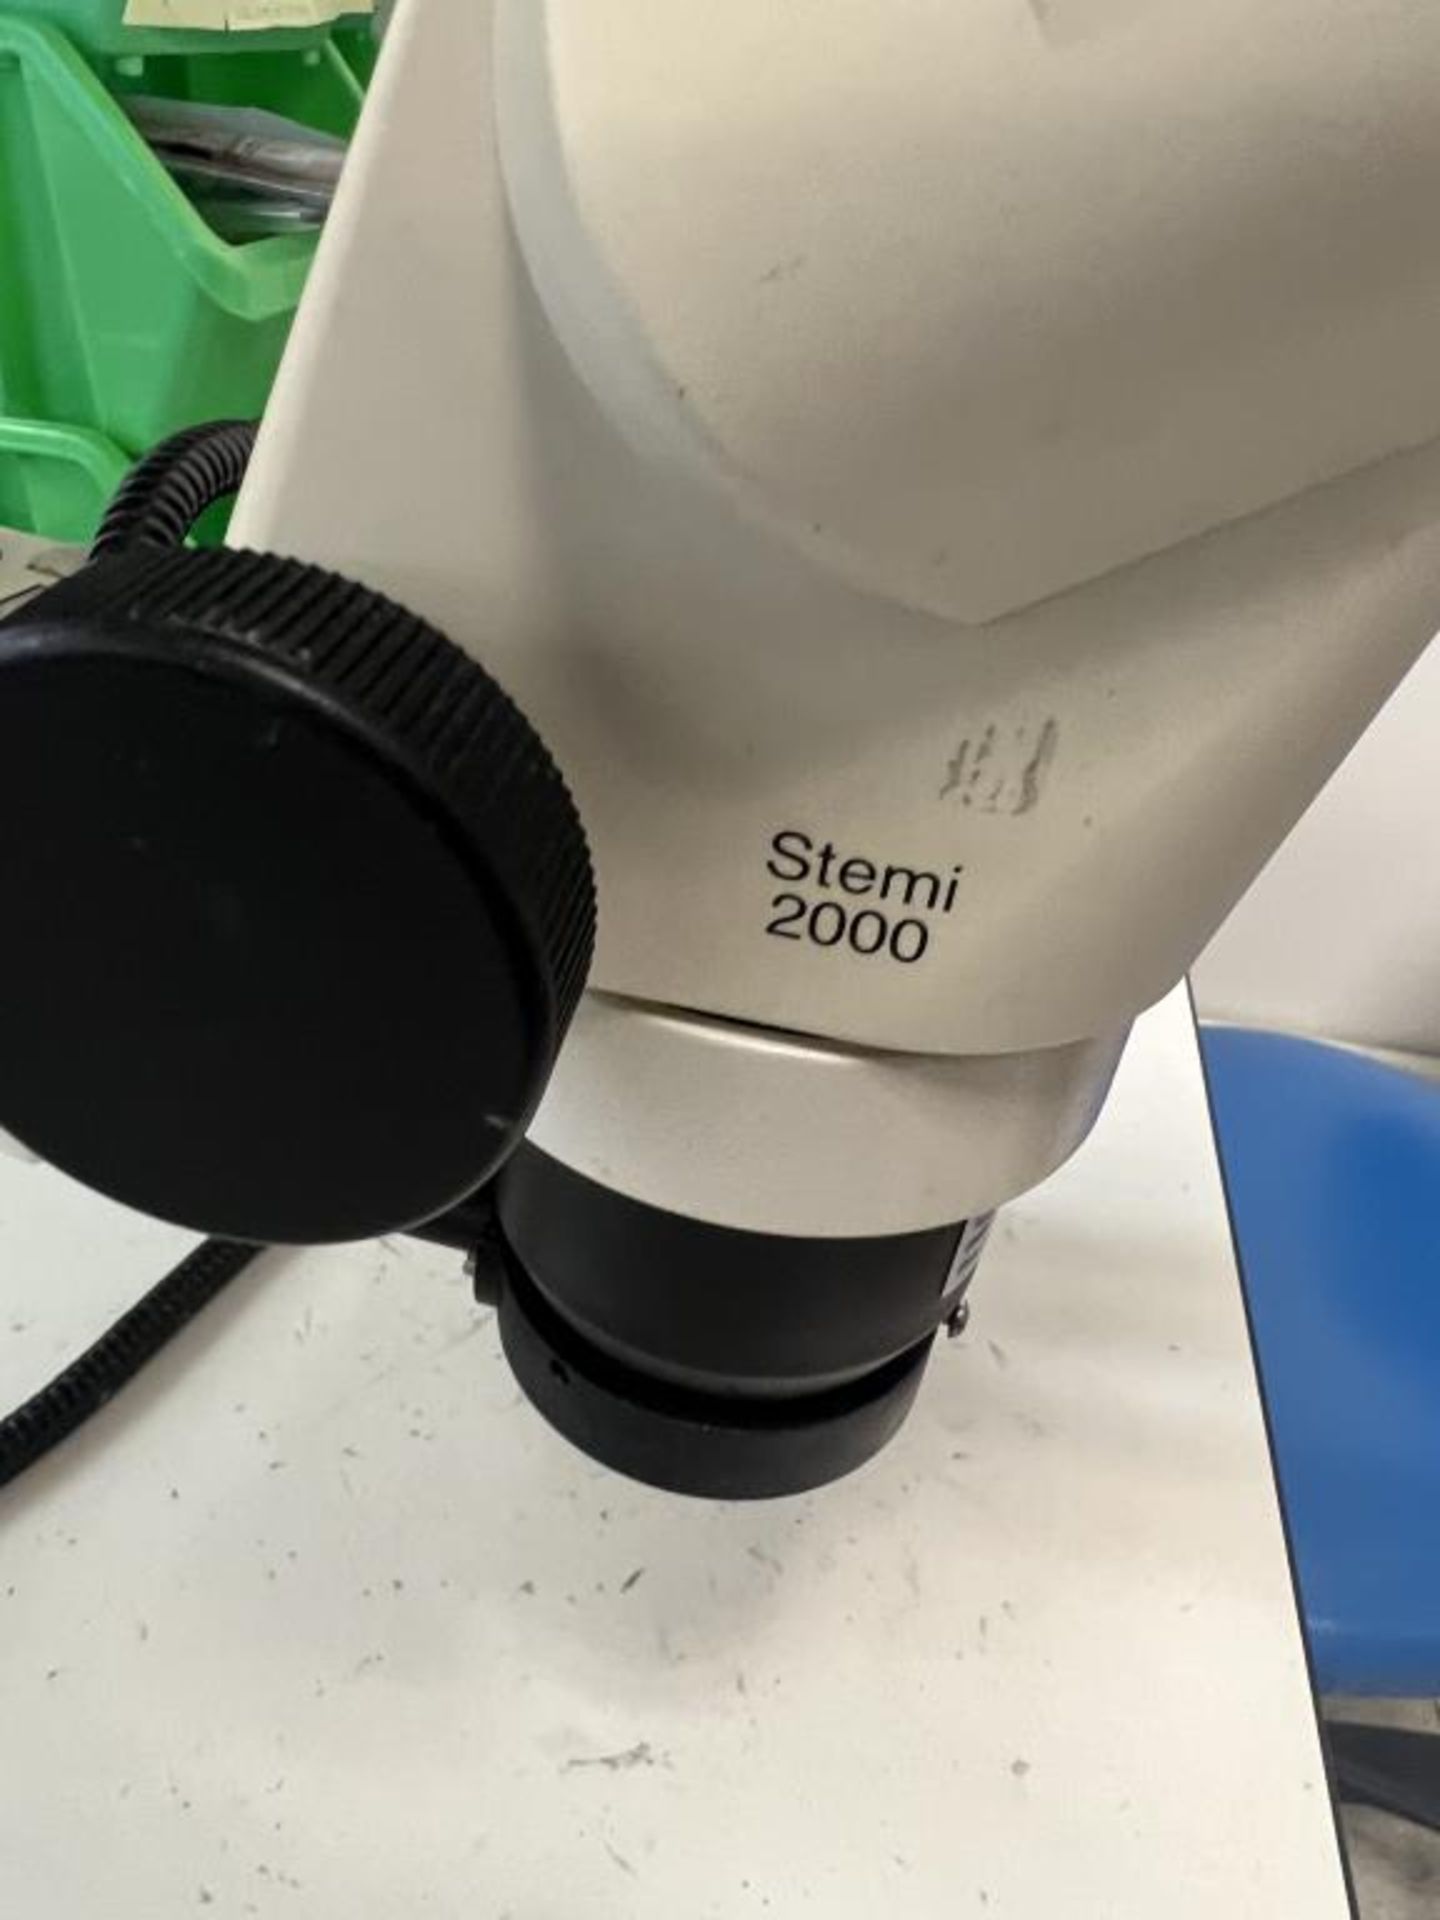 Zeiss Stemi 2000 Stereo Microscope - Image 3 of 5